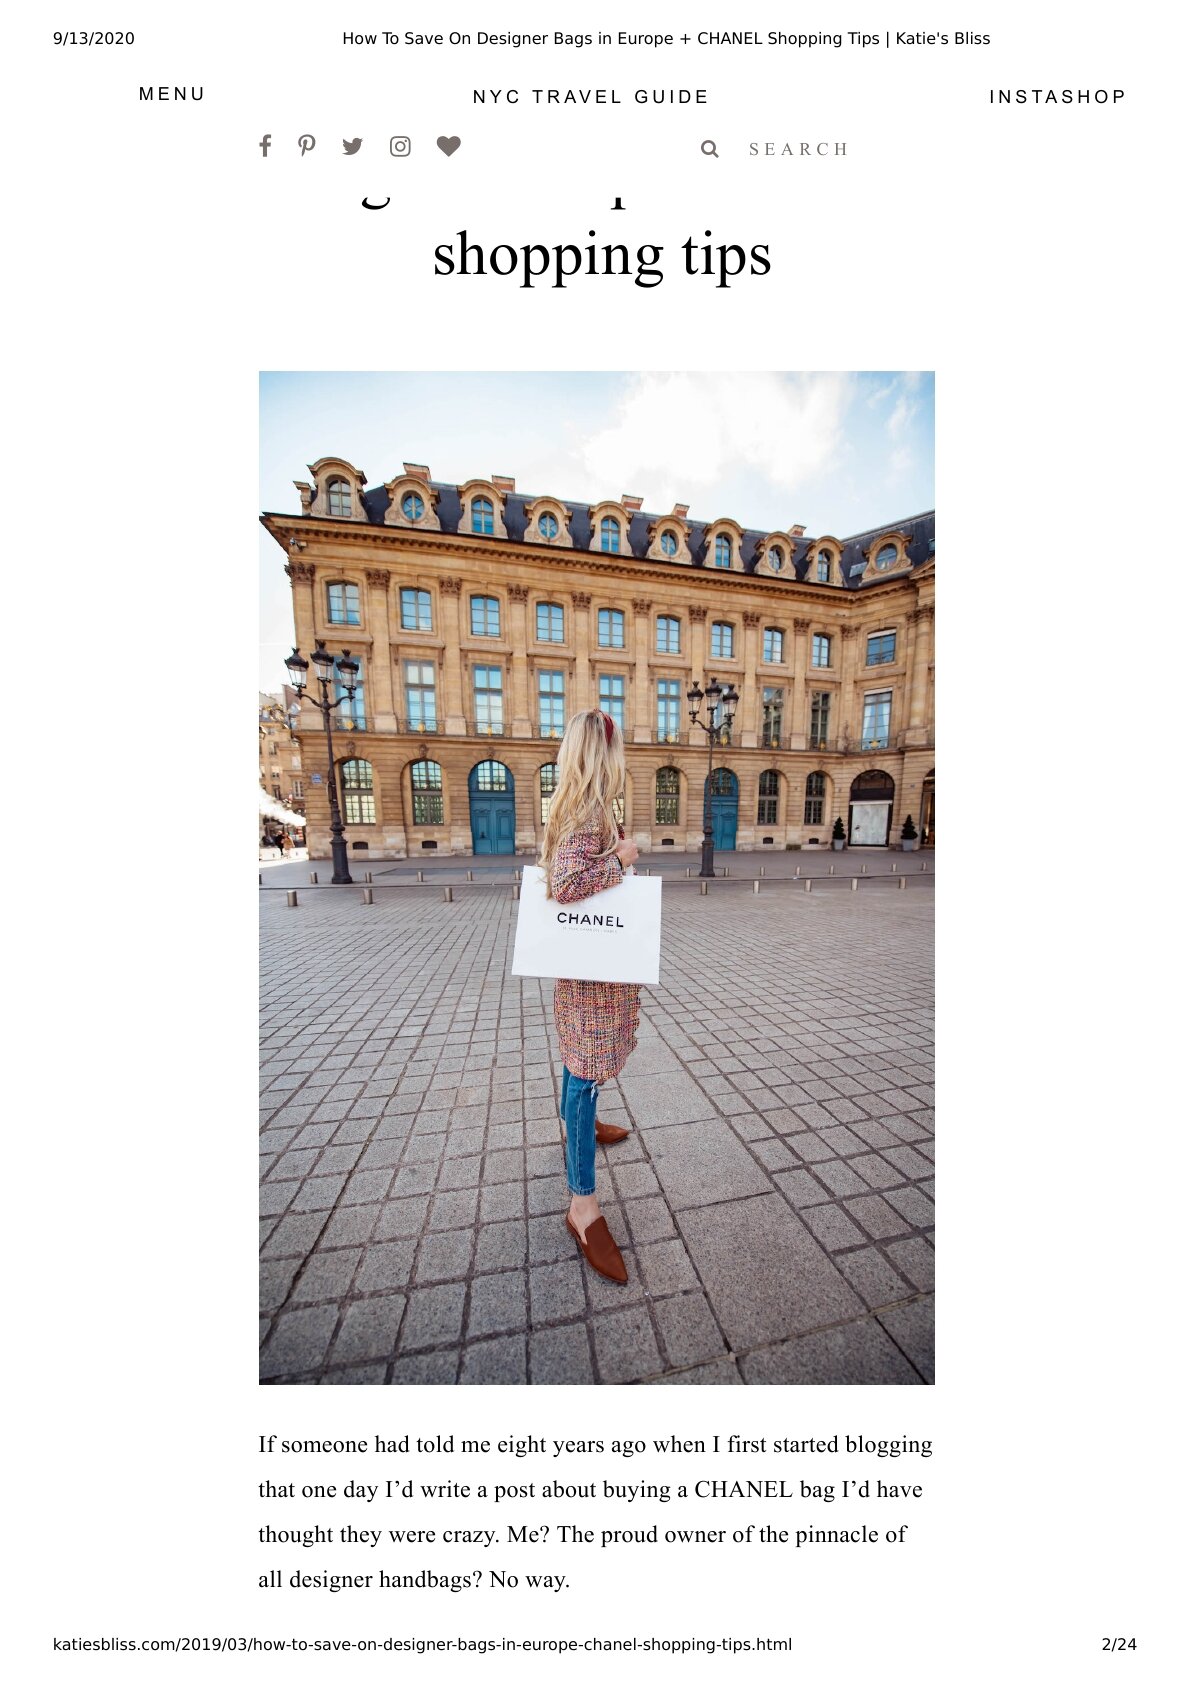 How To Save On Designer Bags in Europe + CHANEL Shopping Tips, Katie's  Bliss